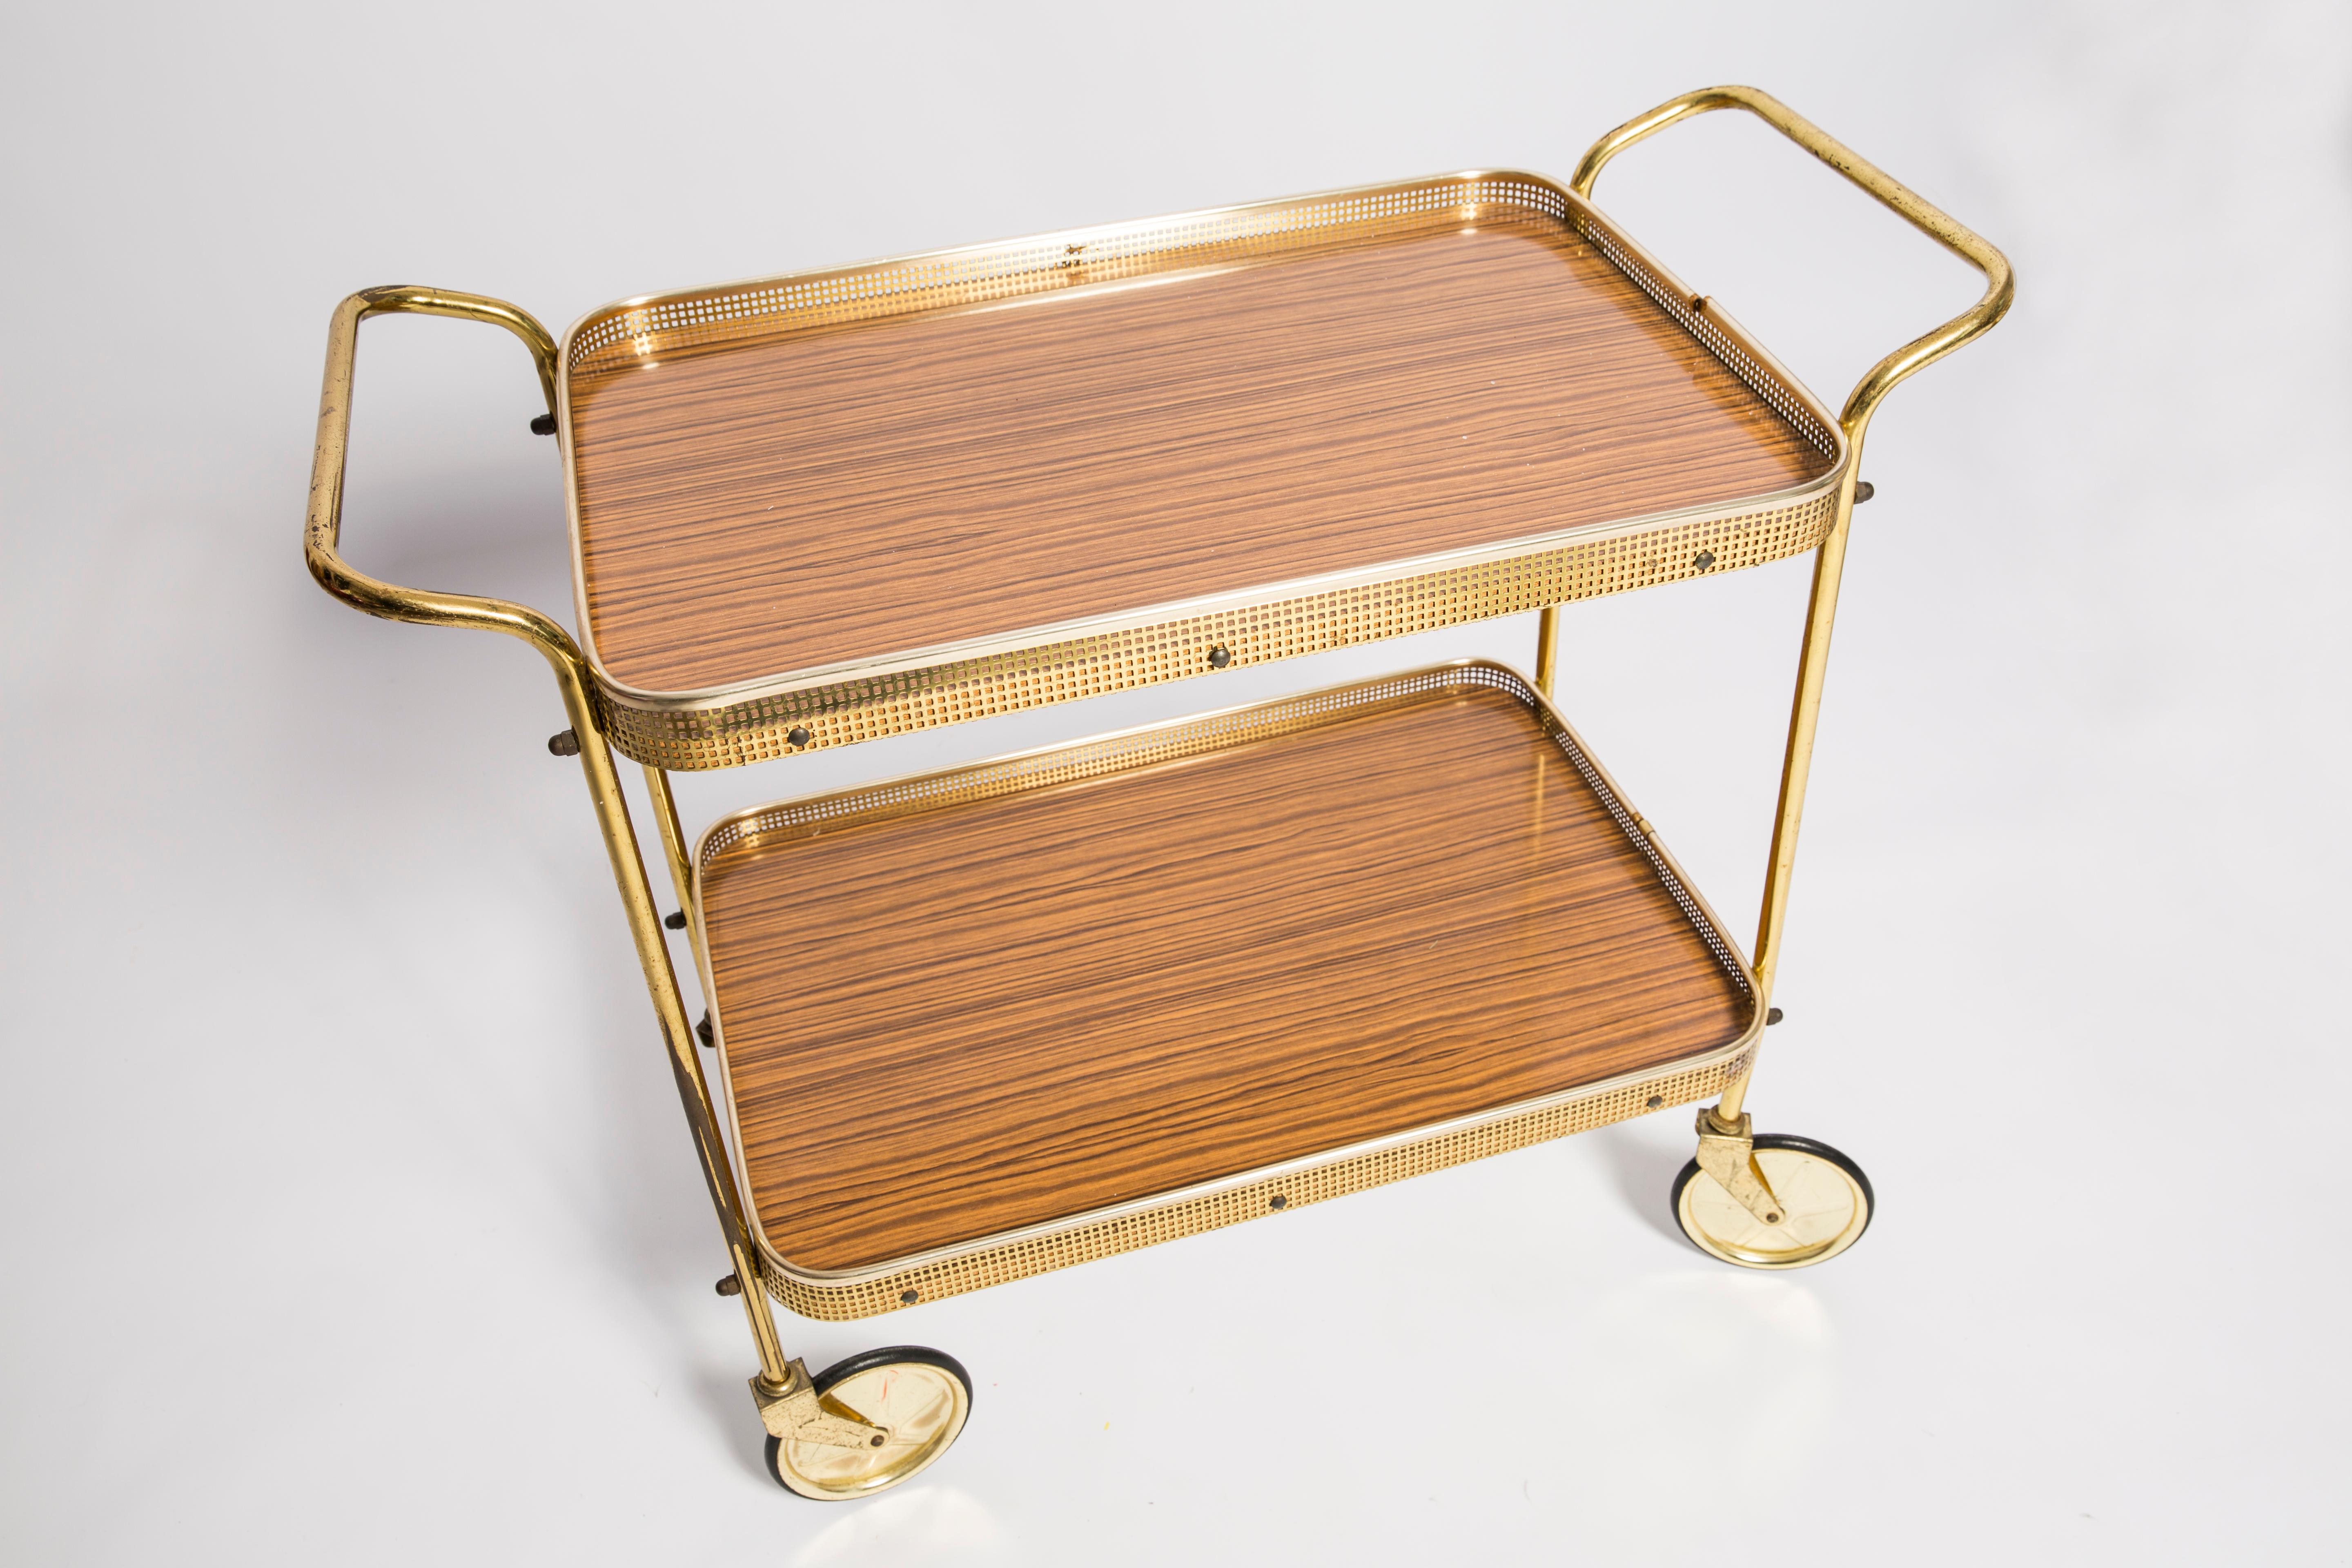 Bamboo Mid-Century Modern Vintage Bart Cart, Gold and Wood, Europe, 1960s For Sale